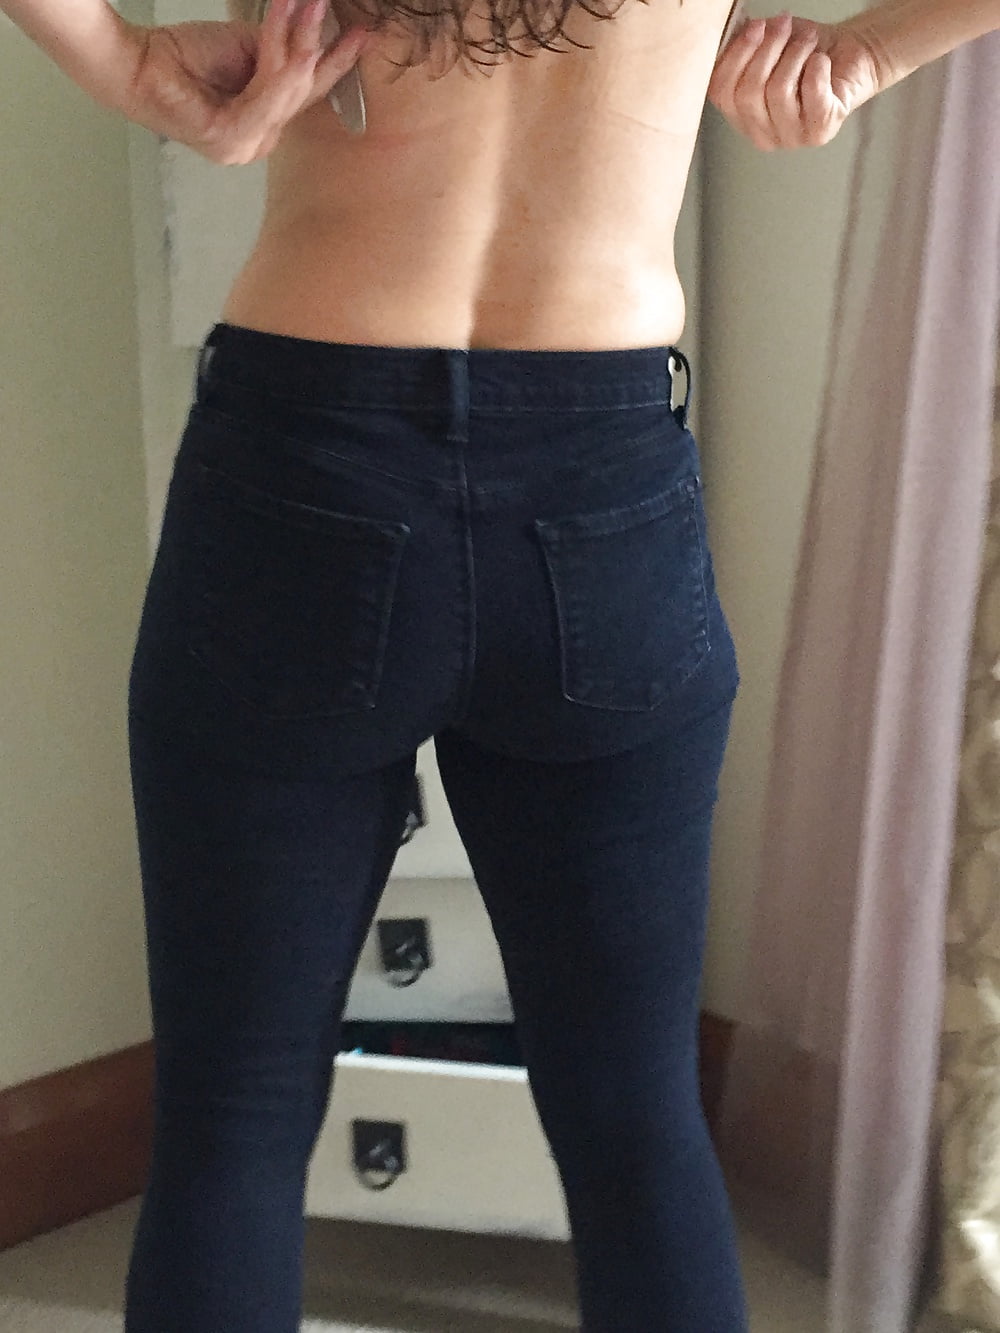 Sex Wife out of shower and into her jeans image 126138139 image